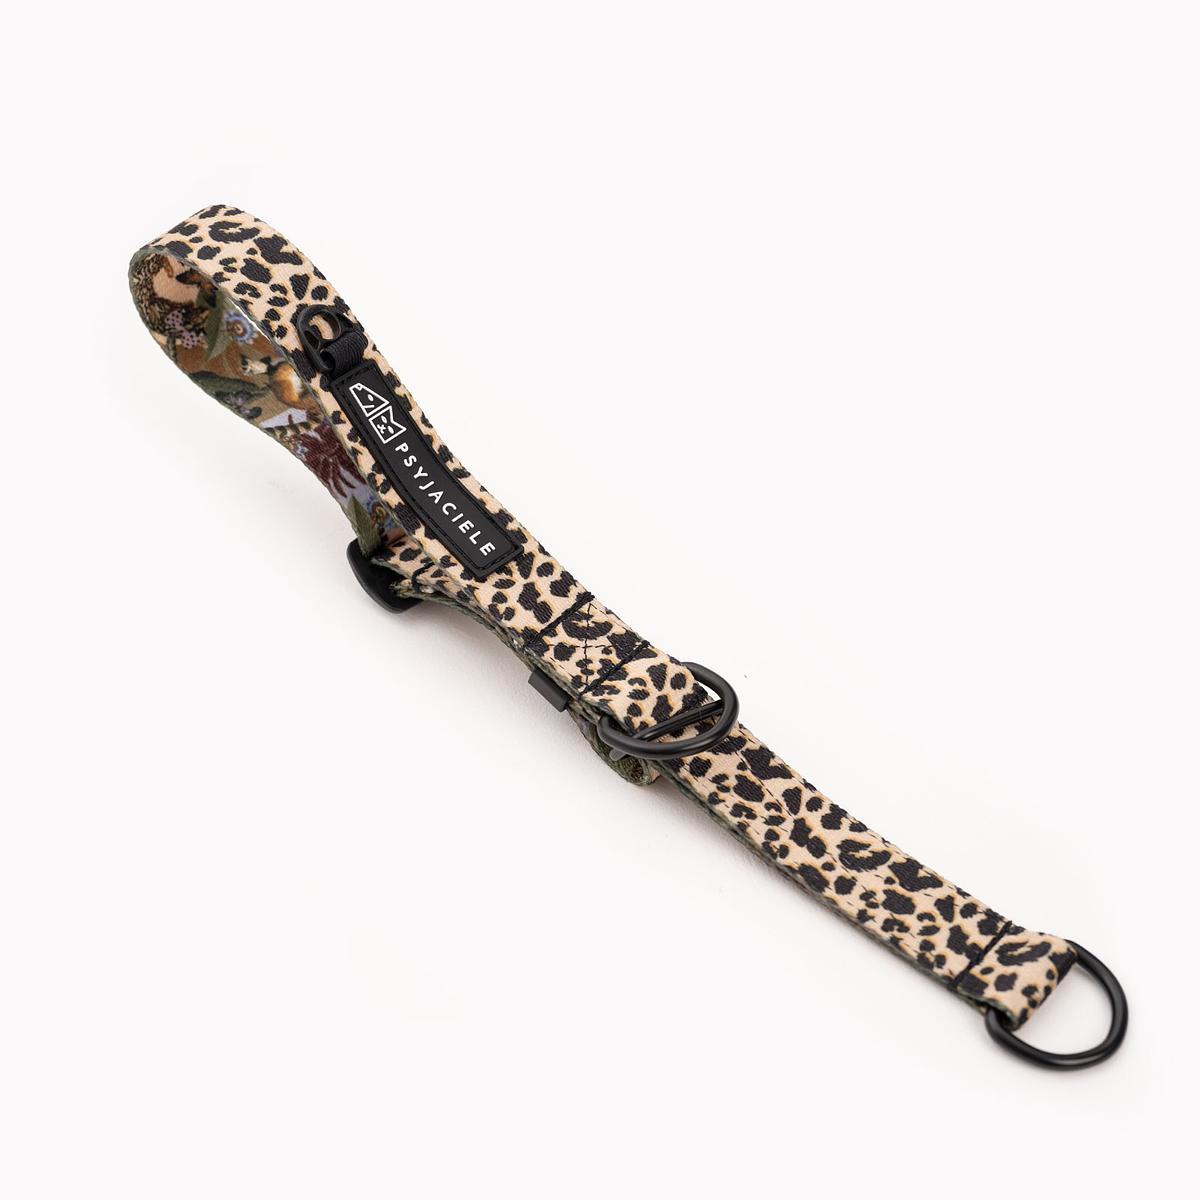 Half-clamp collar "Respect the wildness" LEOPARD PATTERN ON THE TOP